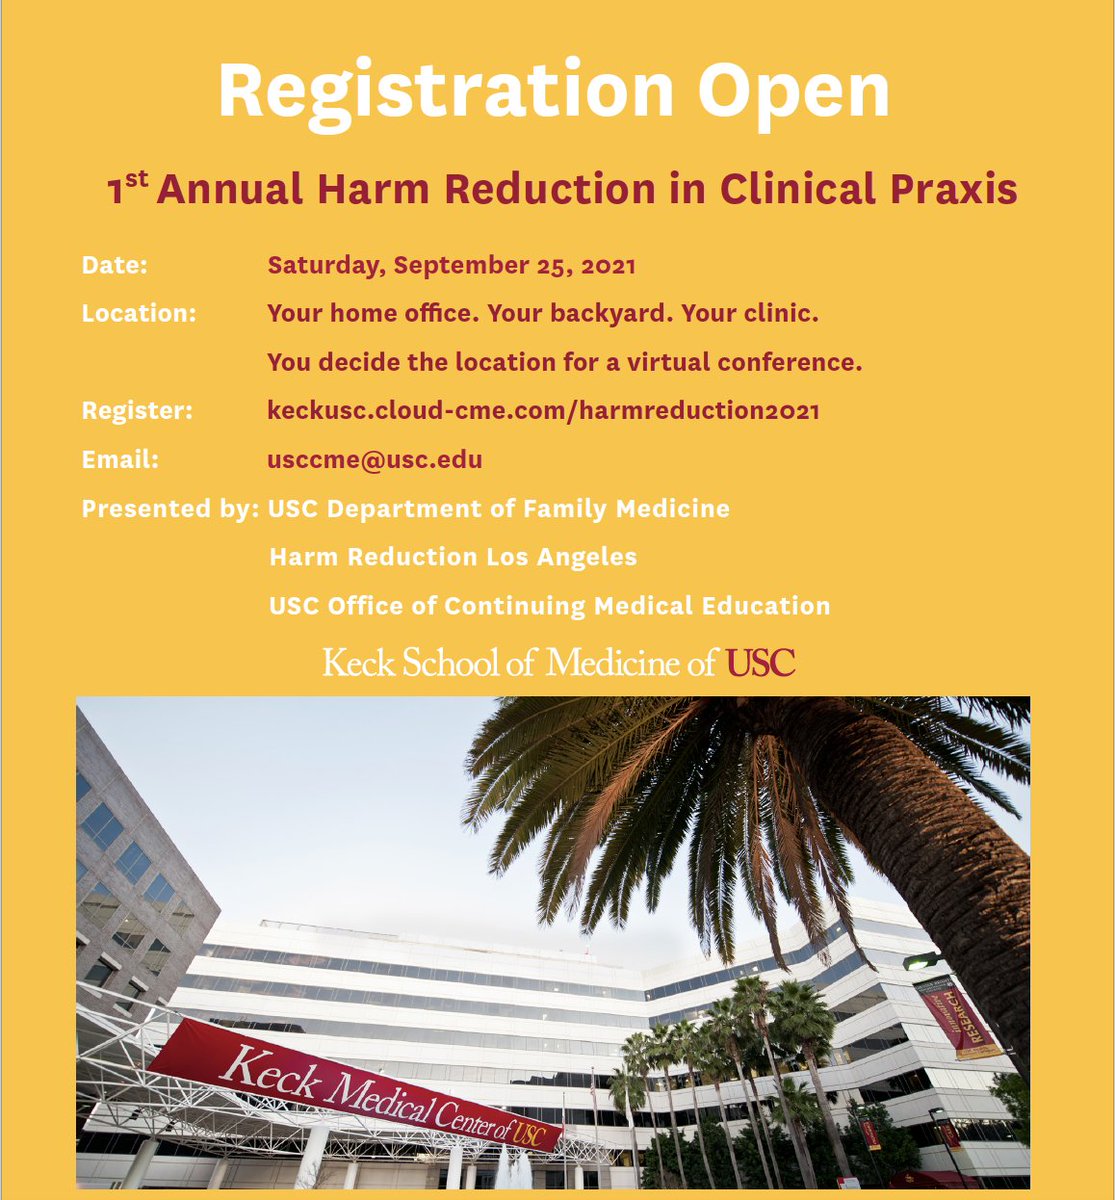 Along with USC Department of Family Medicine and the USC Office of Continuing Medical Education, we are presenting the 1st Annual Harm Reduction in Clinical Praxis (virtual) conference. Sept. 25 from 7:30-1pm PST. keckusc.cloud-cme.com/course/courseo…